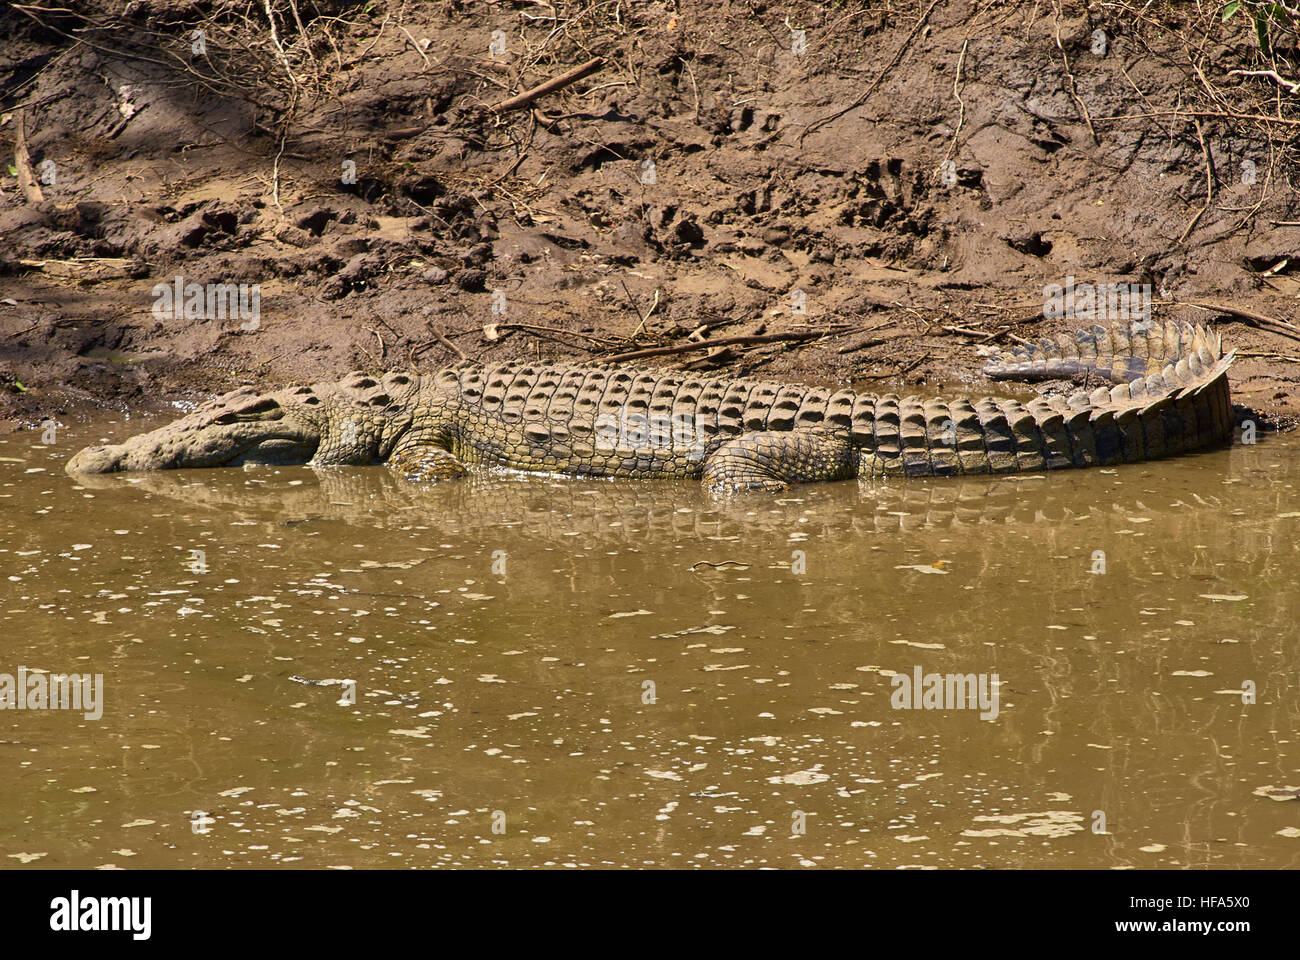 Large crocodile in low-water-level Grumeti river patiently waits for the next Wildebeest migration to arrive Stock Photo